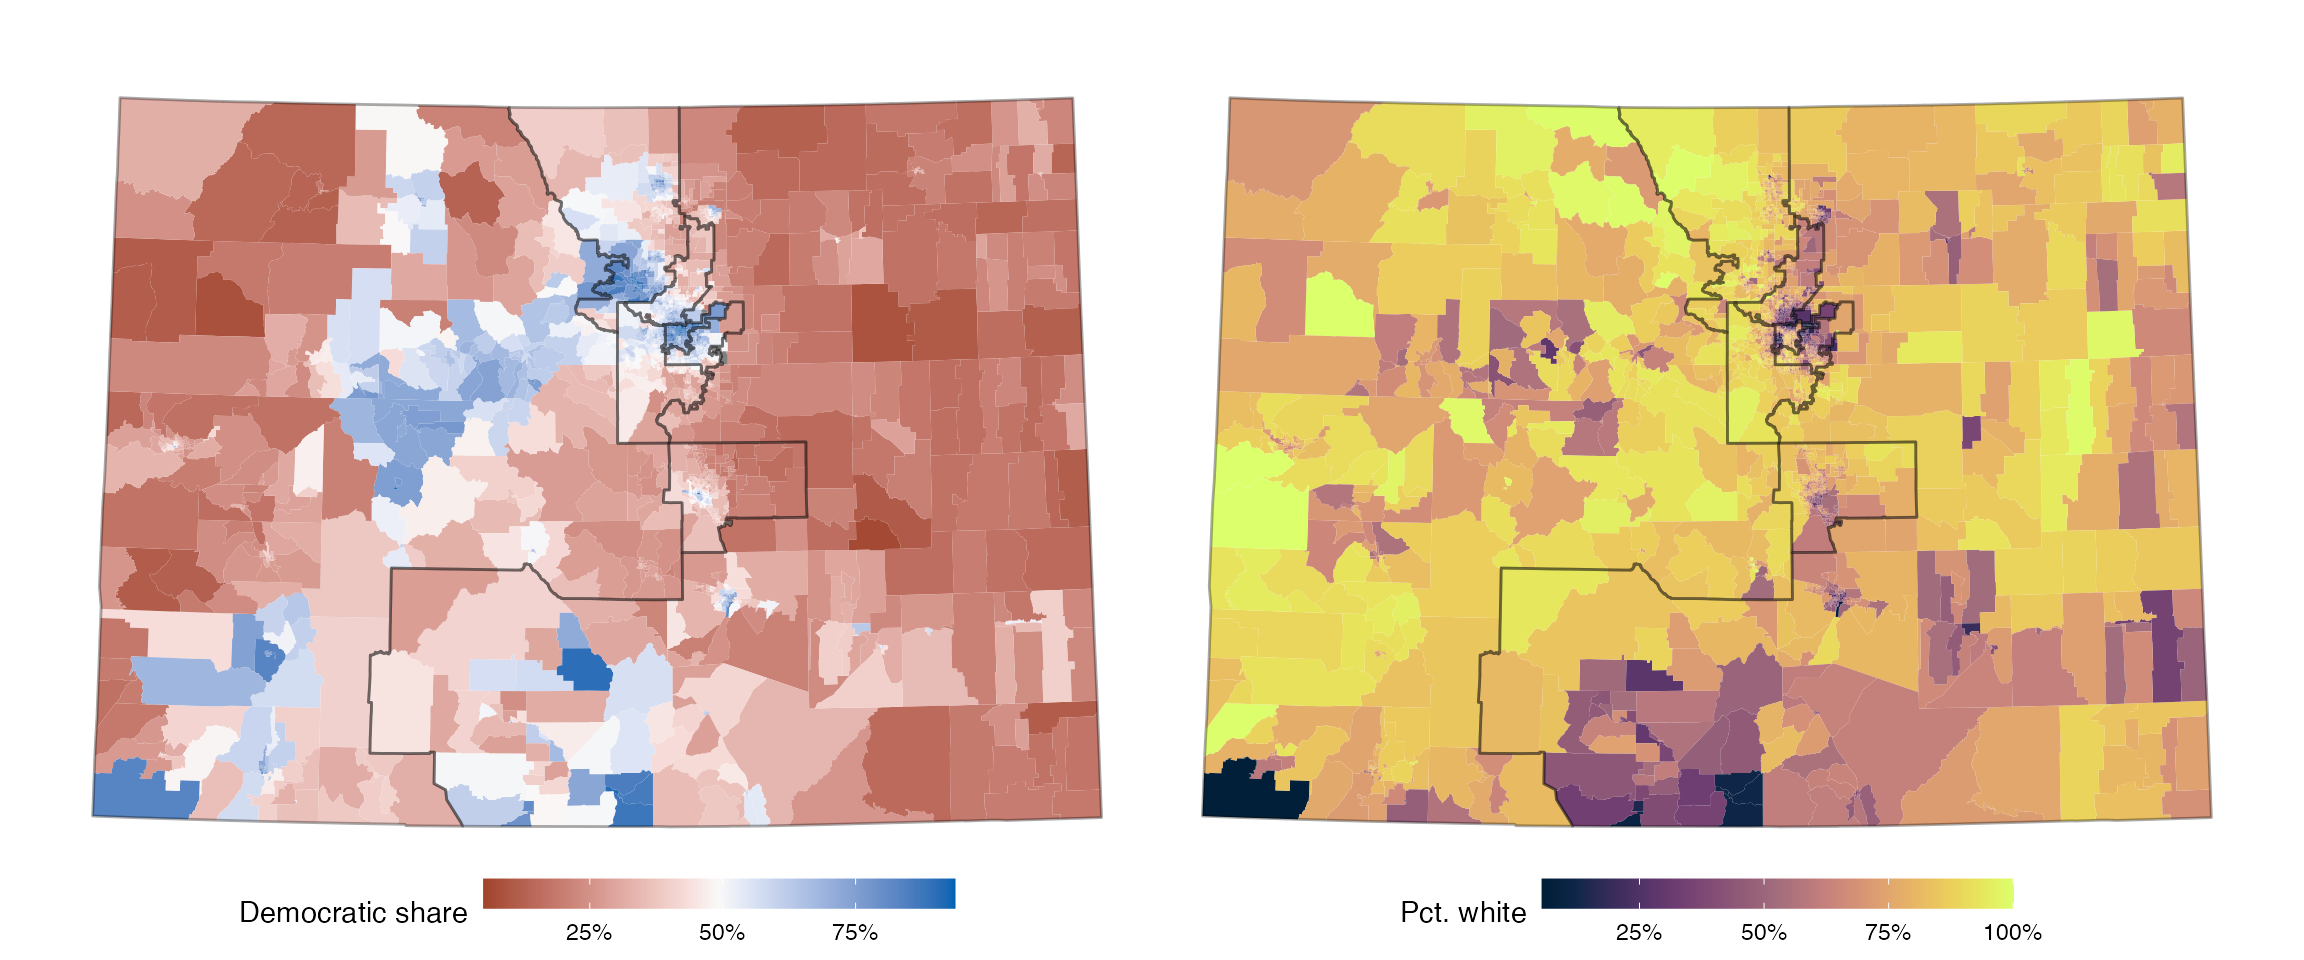 Partisan (2016 election) and demographic patterns in Colorado, with proposed districts overlaid.